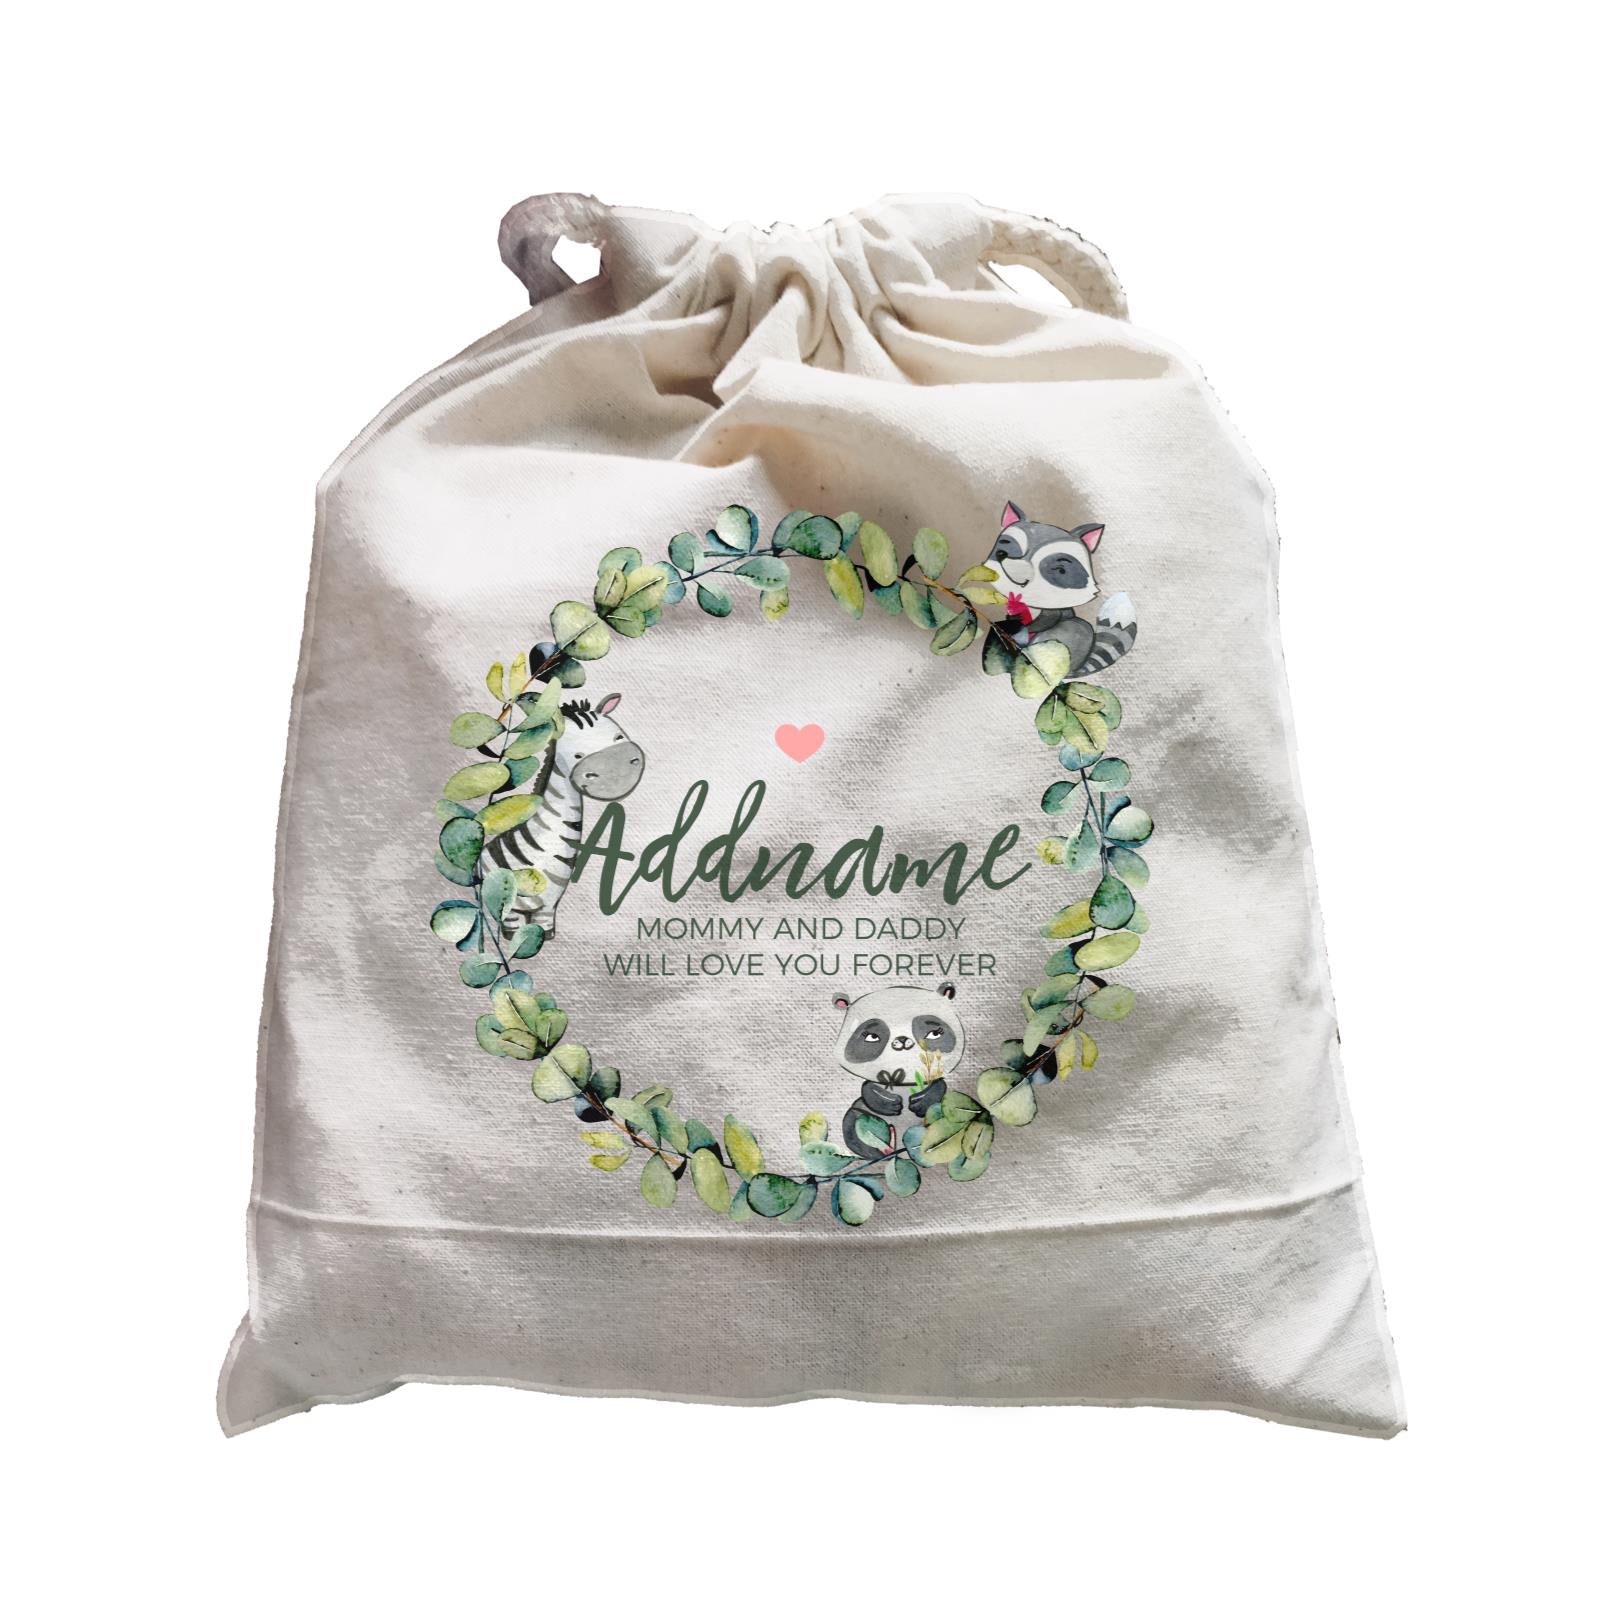 Watercolour Panda Zebra and Racoon Leaf Wreath Personalizable with Name and Text Satchel